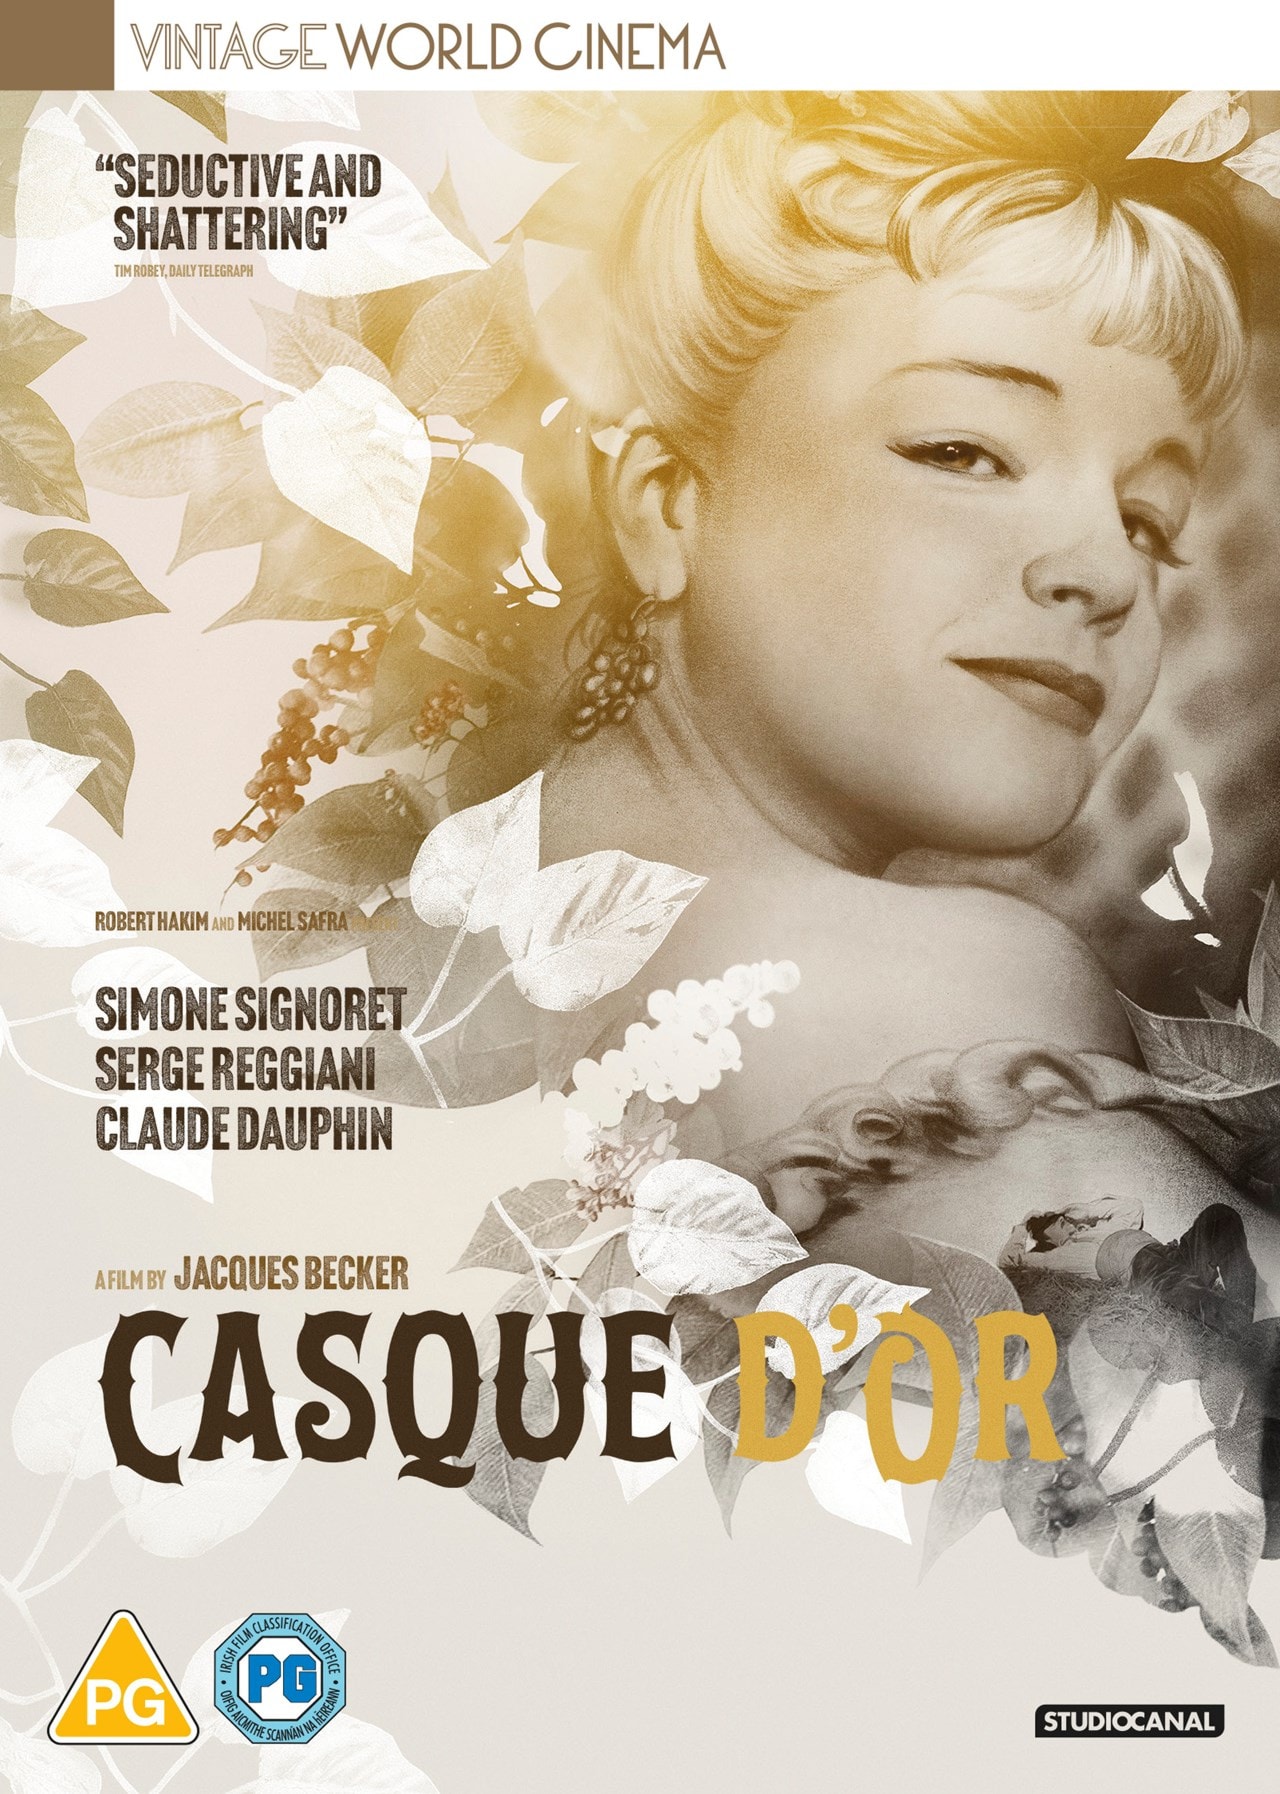 Casque d'Or | DVD | Free shipping over £20 | HMV Store